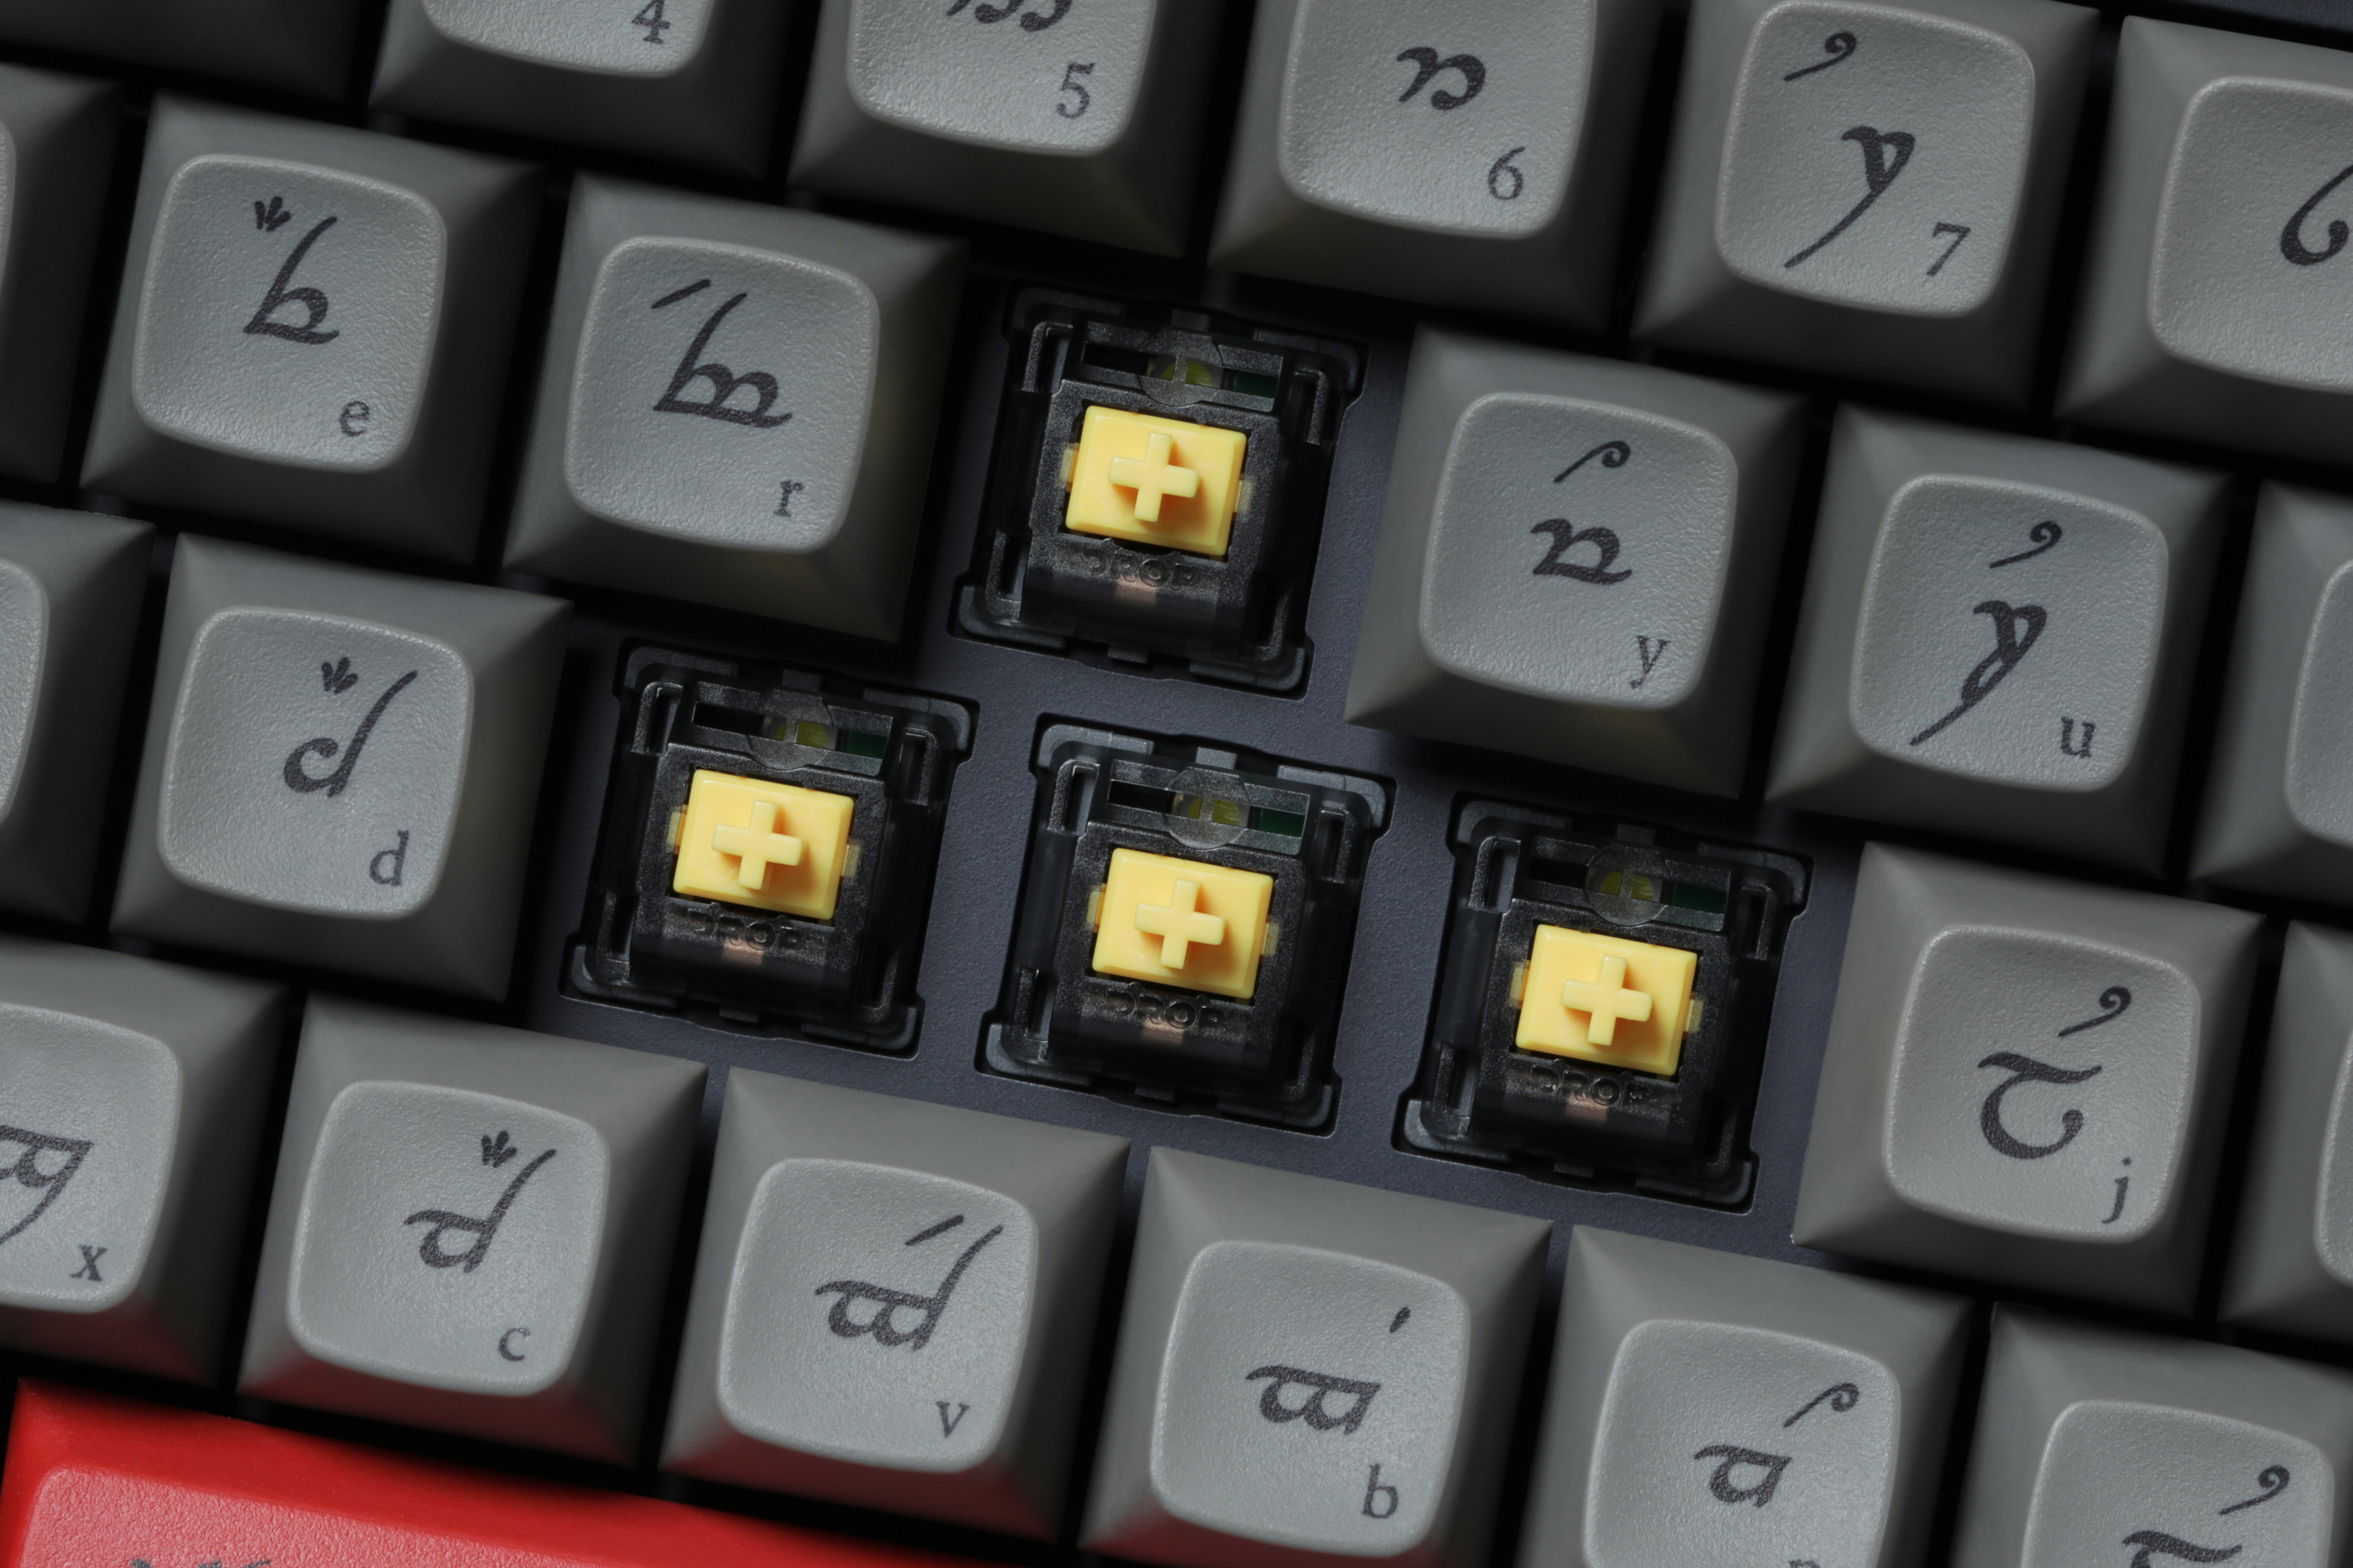 Drop's new Lord of the Rings keyboard